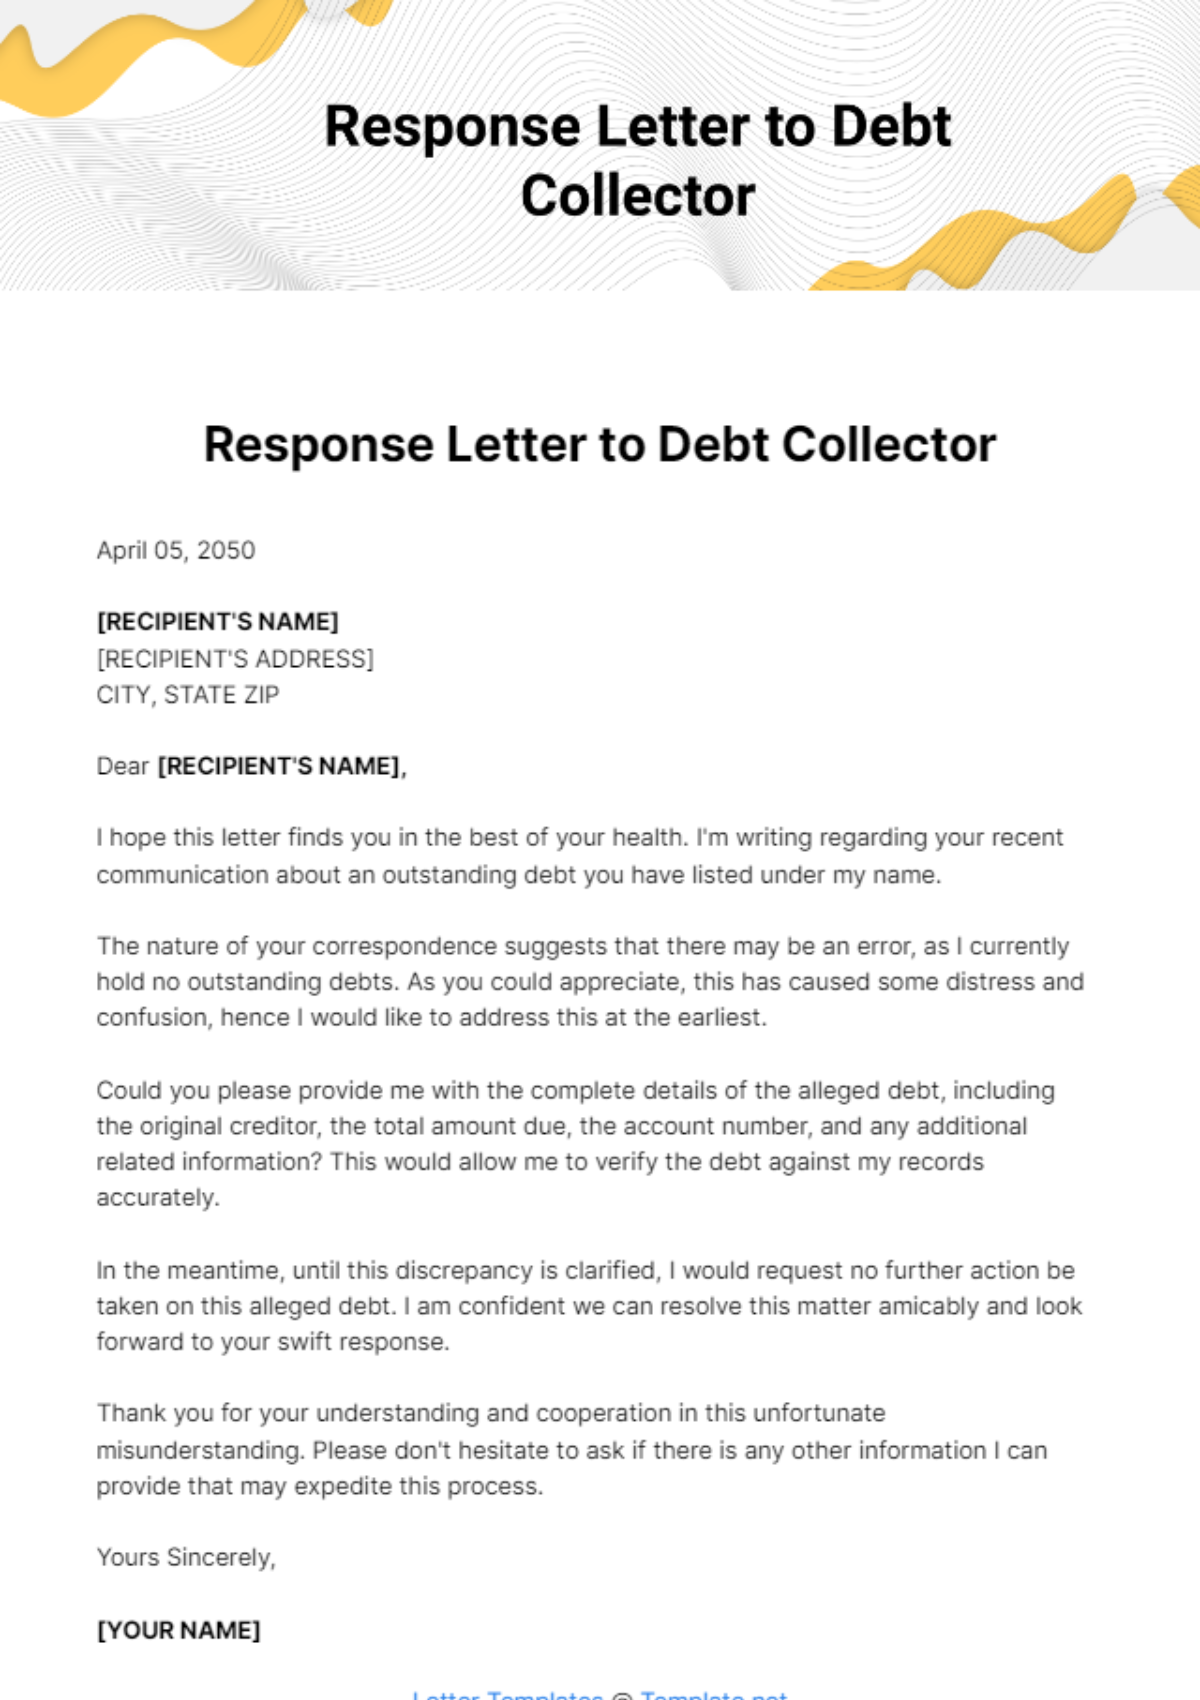 Response Letter to Debt Collector Template